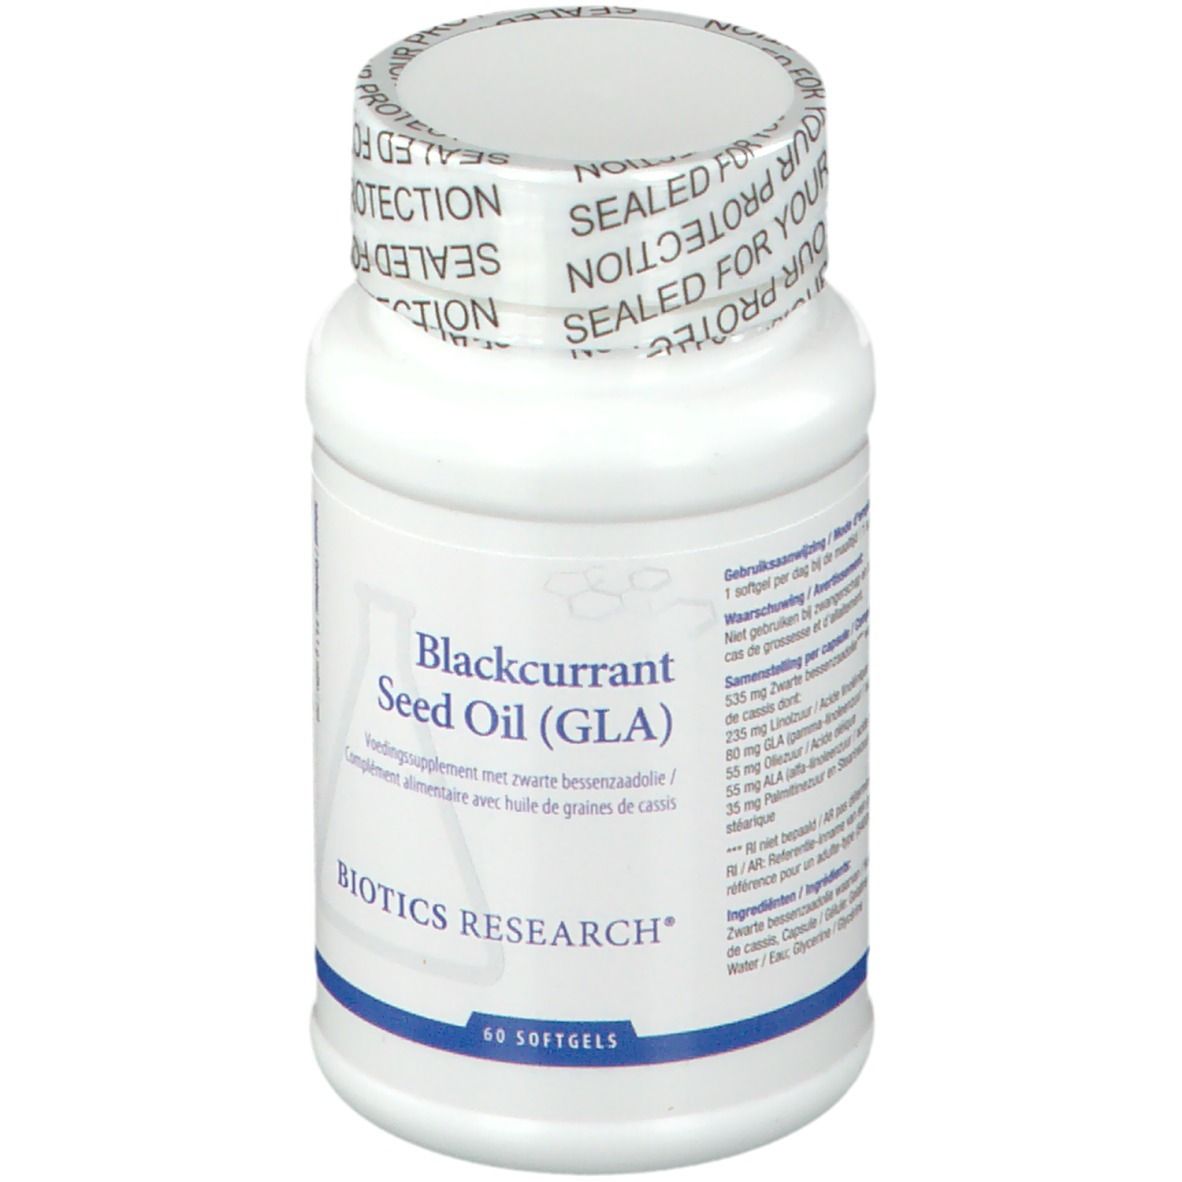 Biotics Research® Blackcurrant Seed Oil